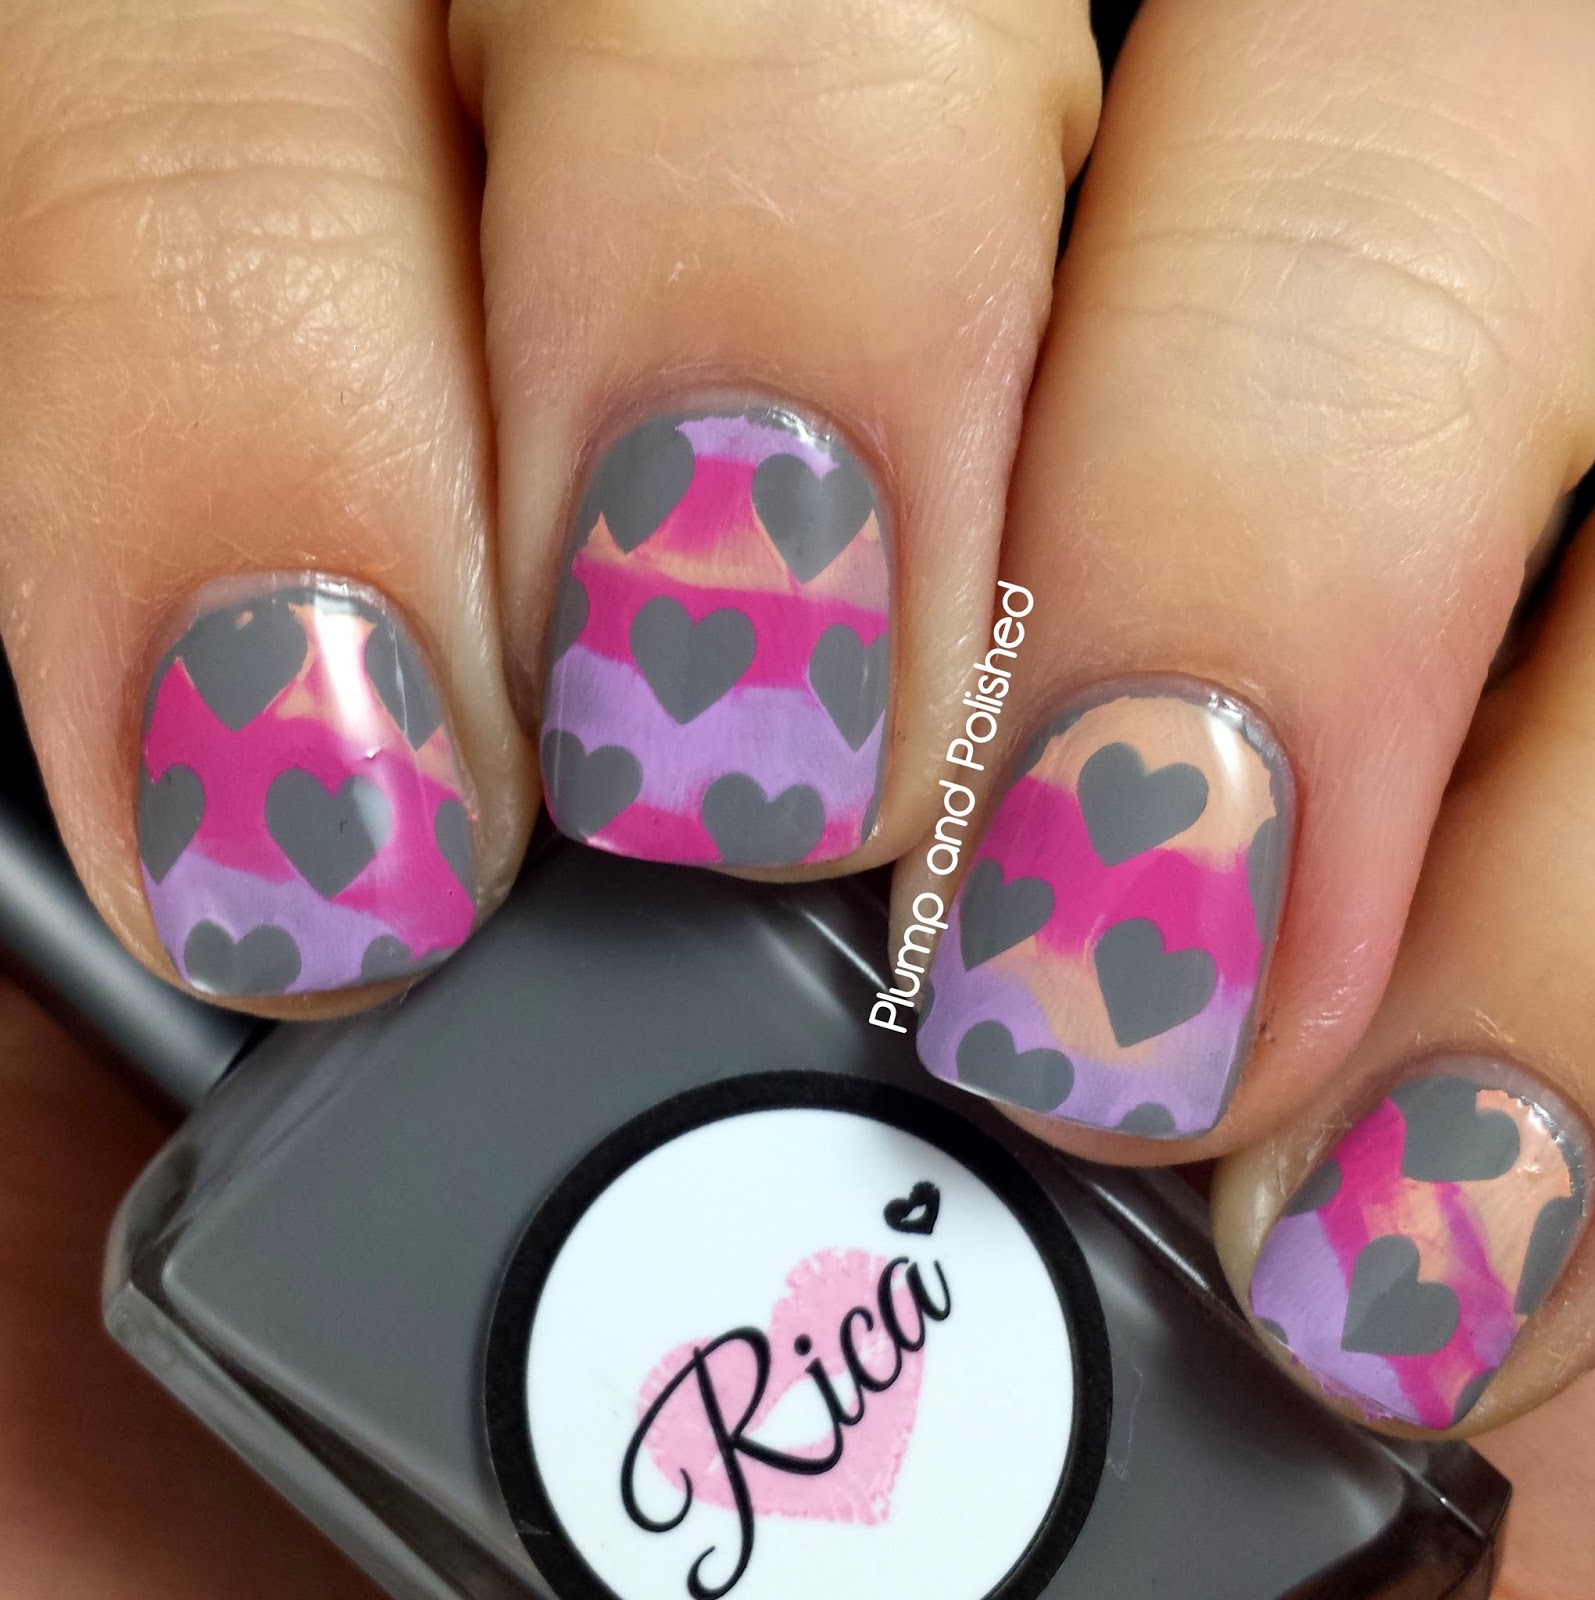 Plump and Polished: Rica - Stamped Hearts